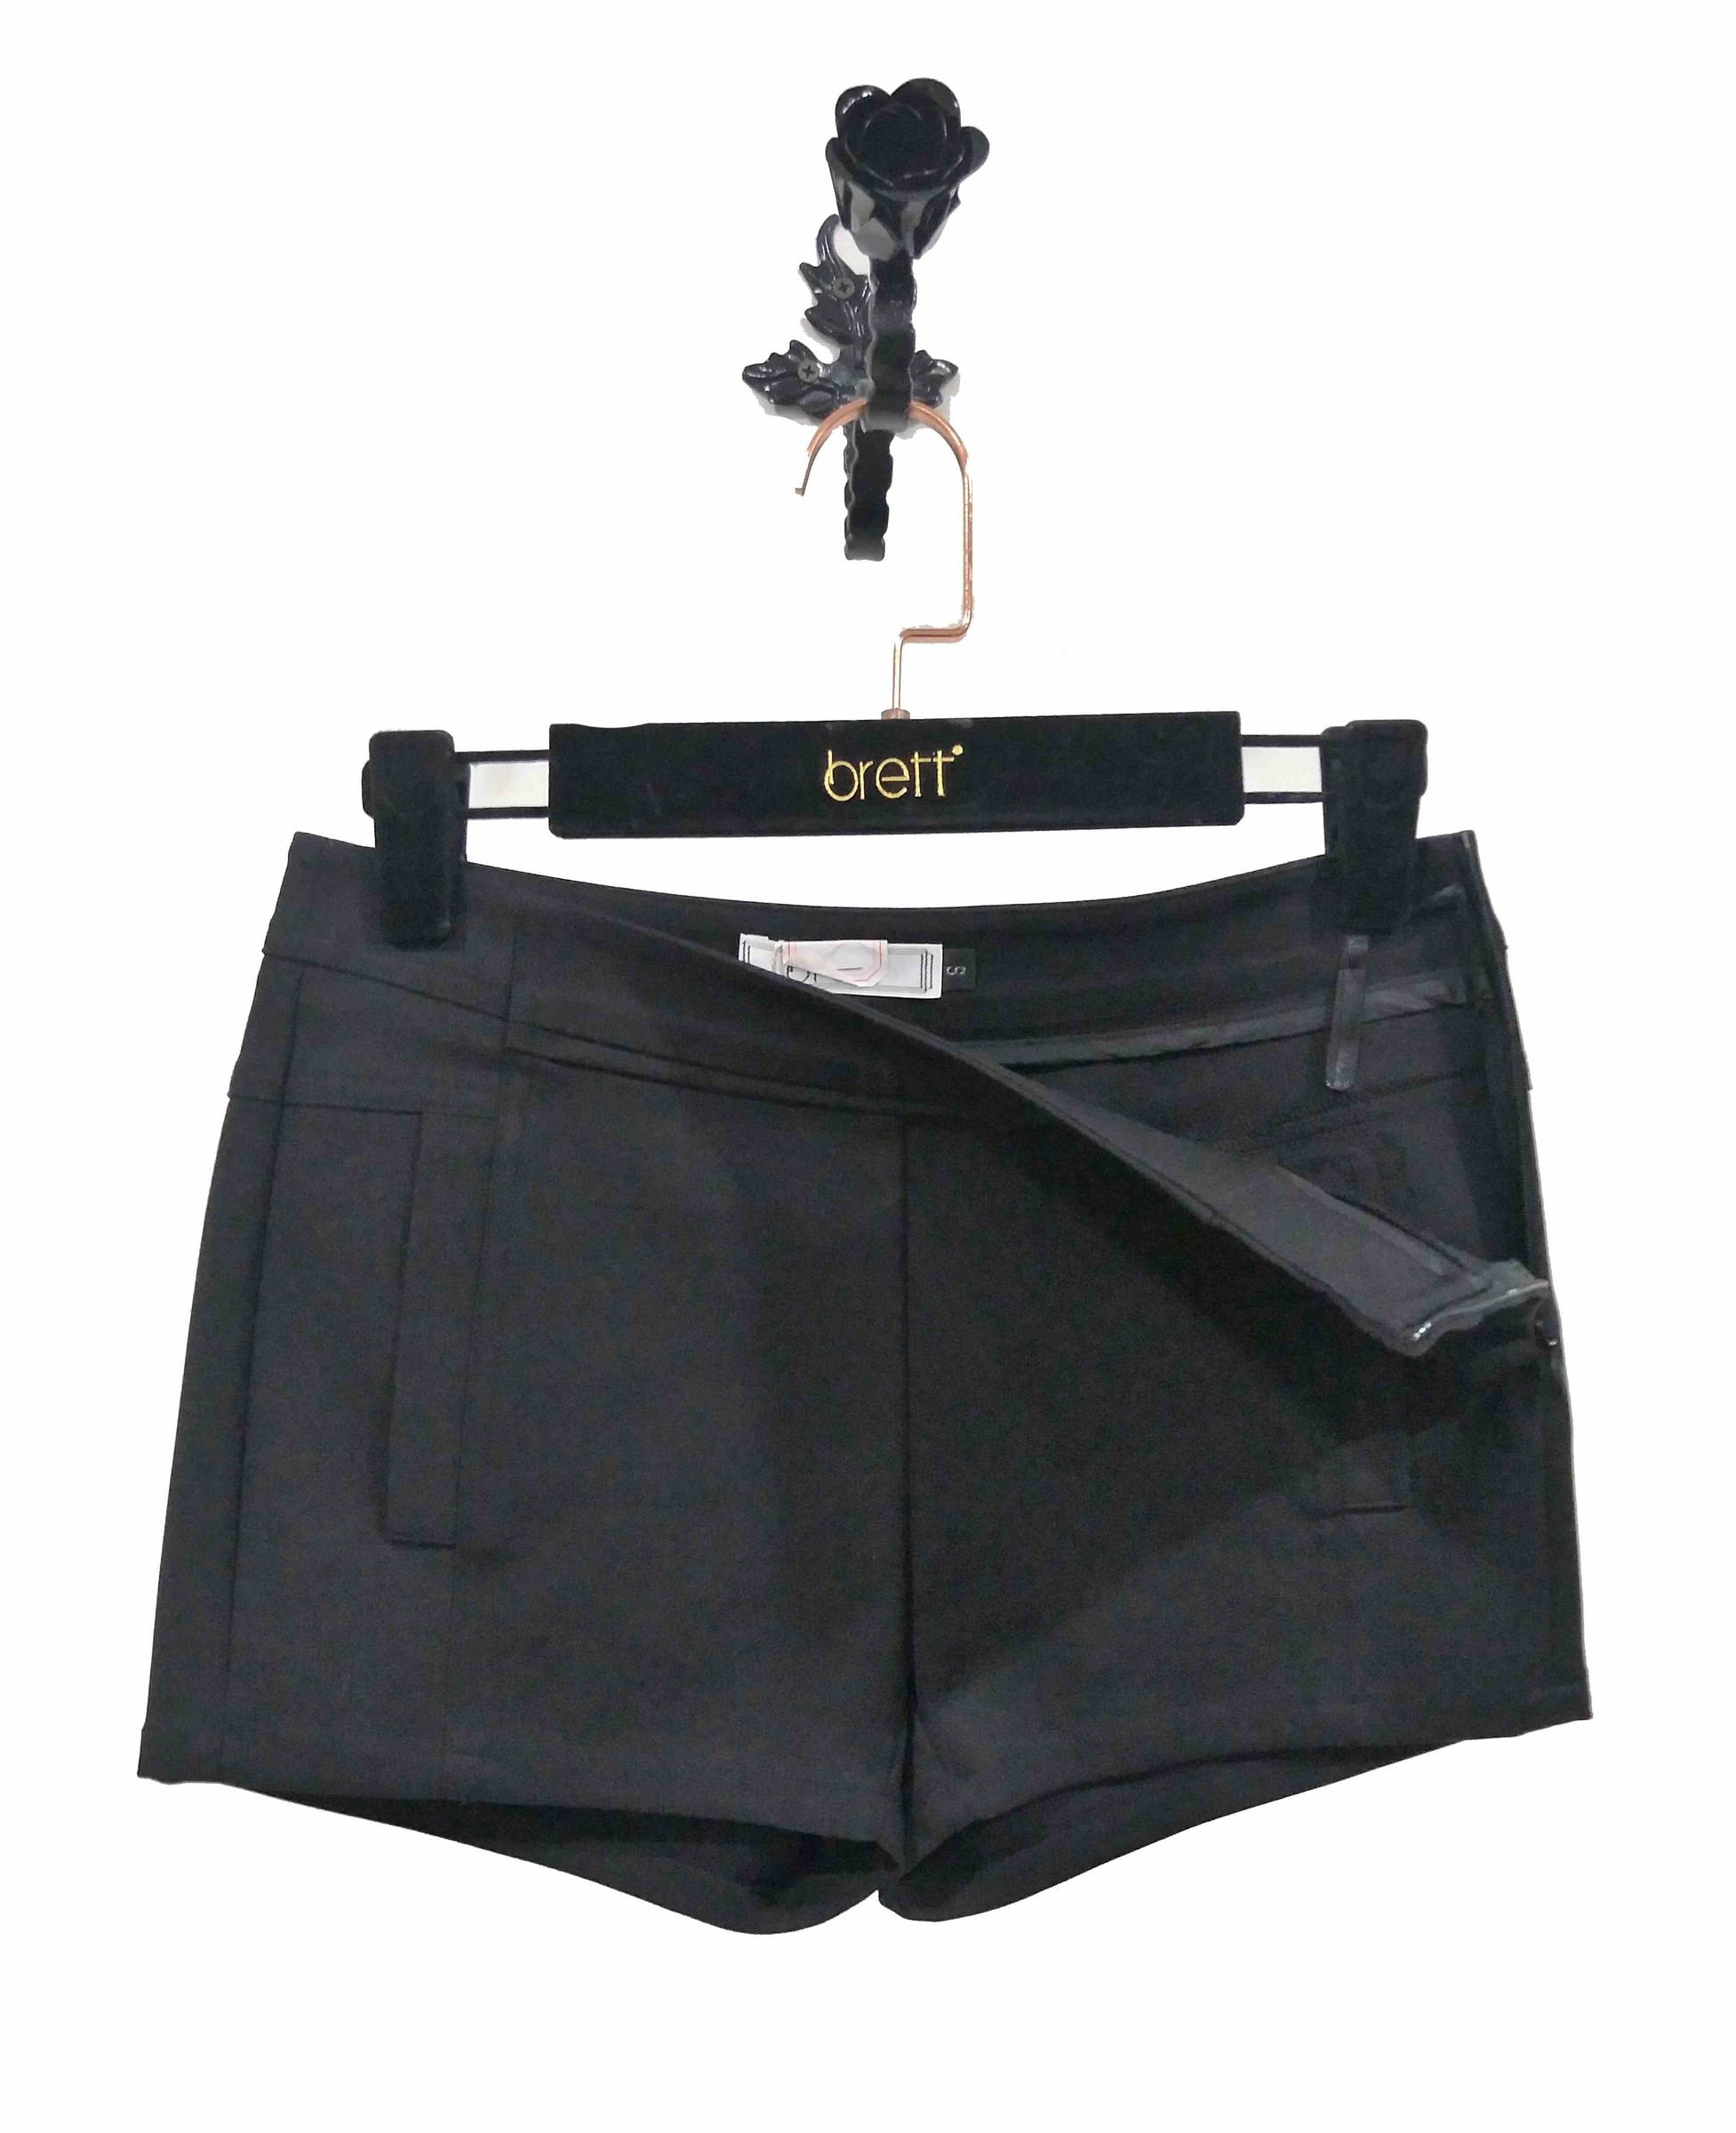 Latest Black shorts with Wide leg shorts ladies woman for high waisted shorts factory made ODM OEM (5).jpg